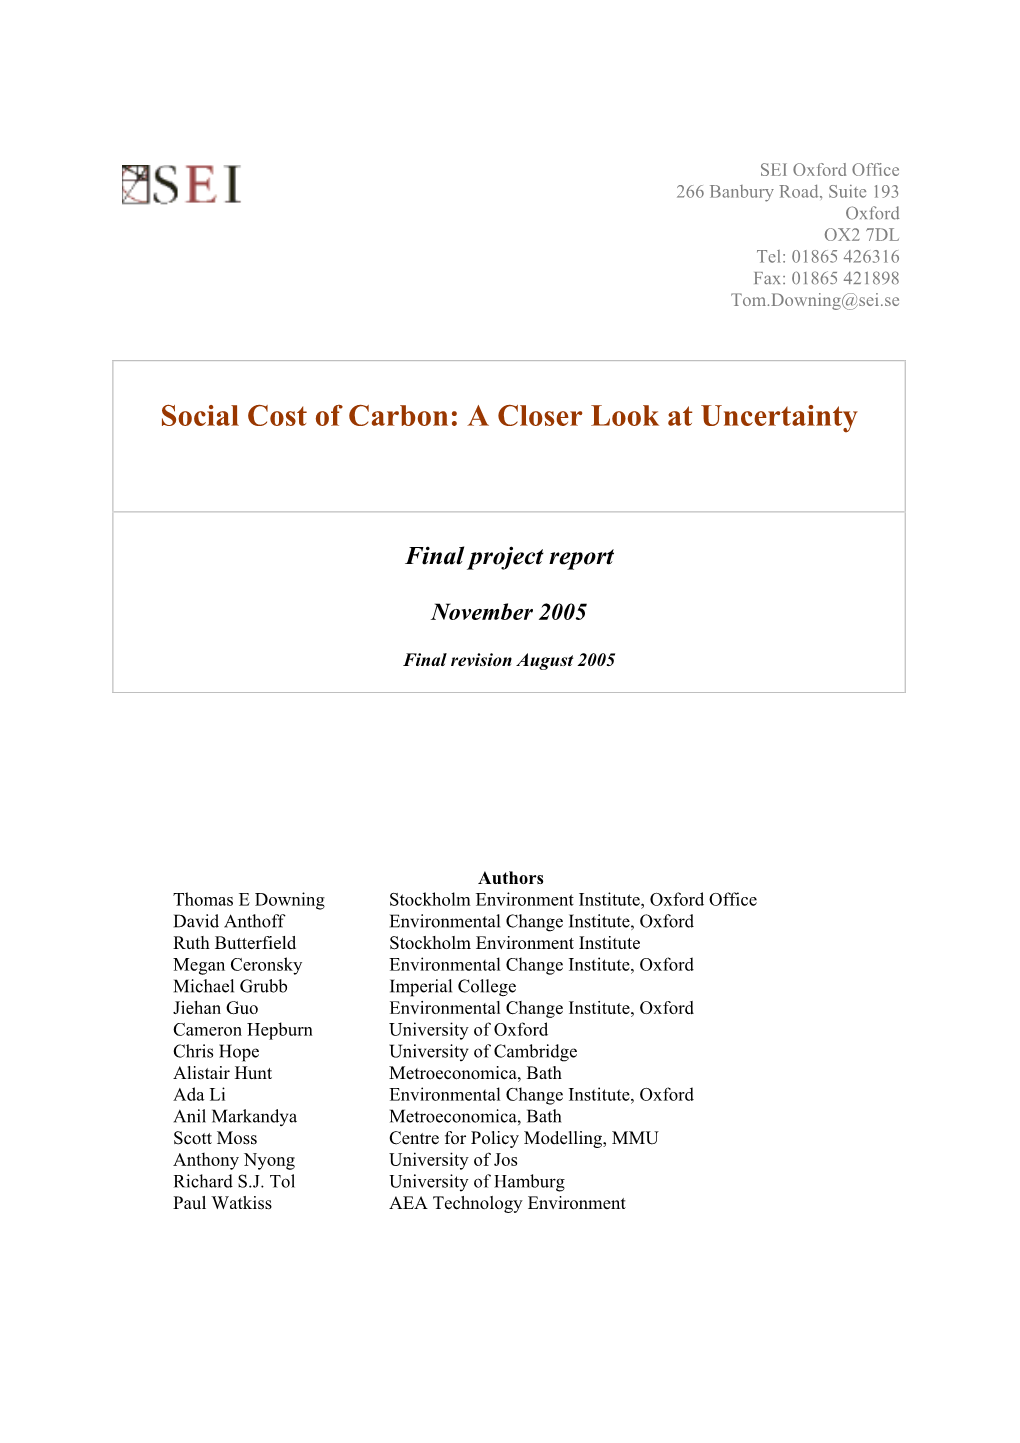 Social Cost of Carbon: a Closer Look at Uncertainty